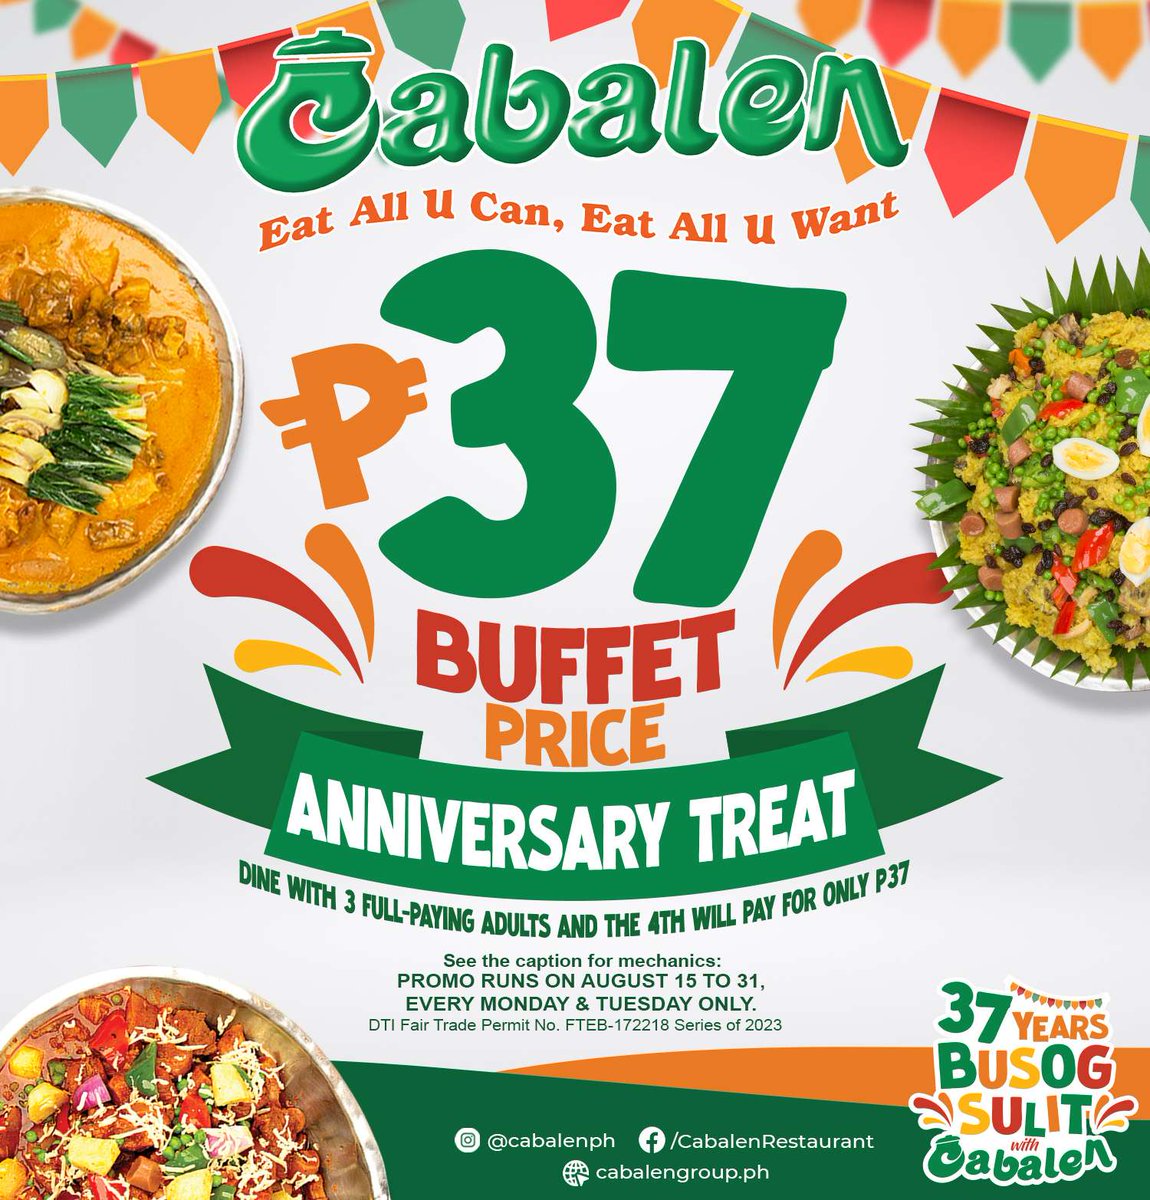 Eat-All-You-Can Buffet for only Php 37?😱✨ Don't miss out on Cabalen's 37 years of Busog Sulit promo until August 31 only. So dine in now at @sm_southmall and treat your squad in #AWorldOfExperienceAtSM! 😋🥘🍲 #EverythingsHereAtSM